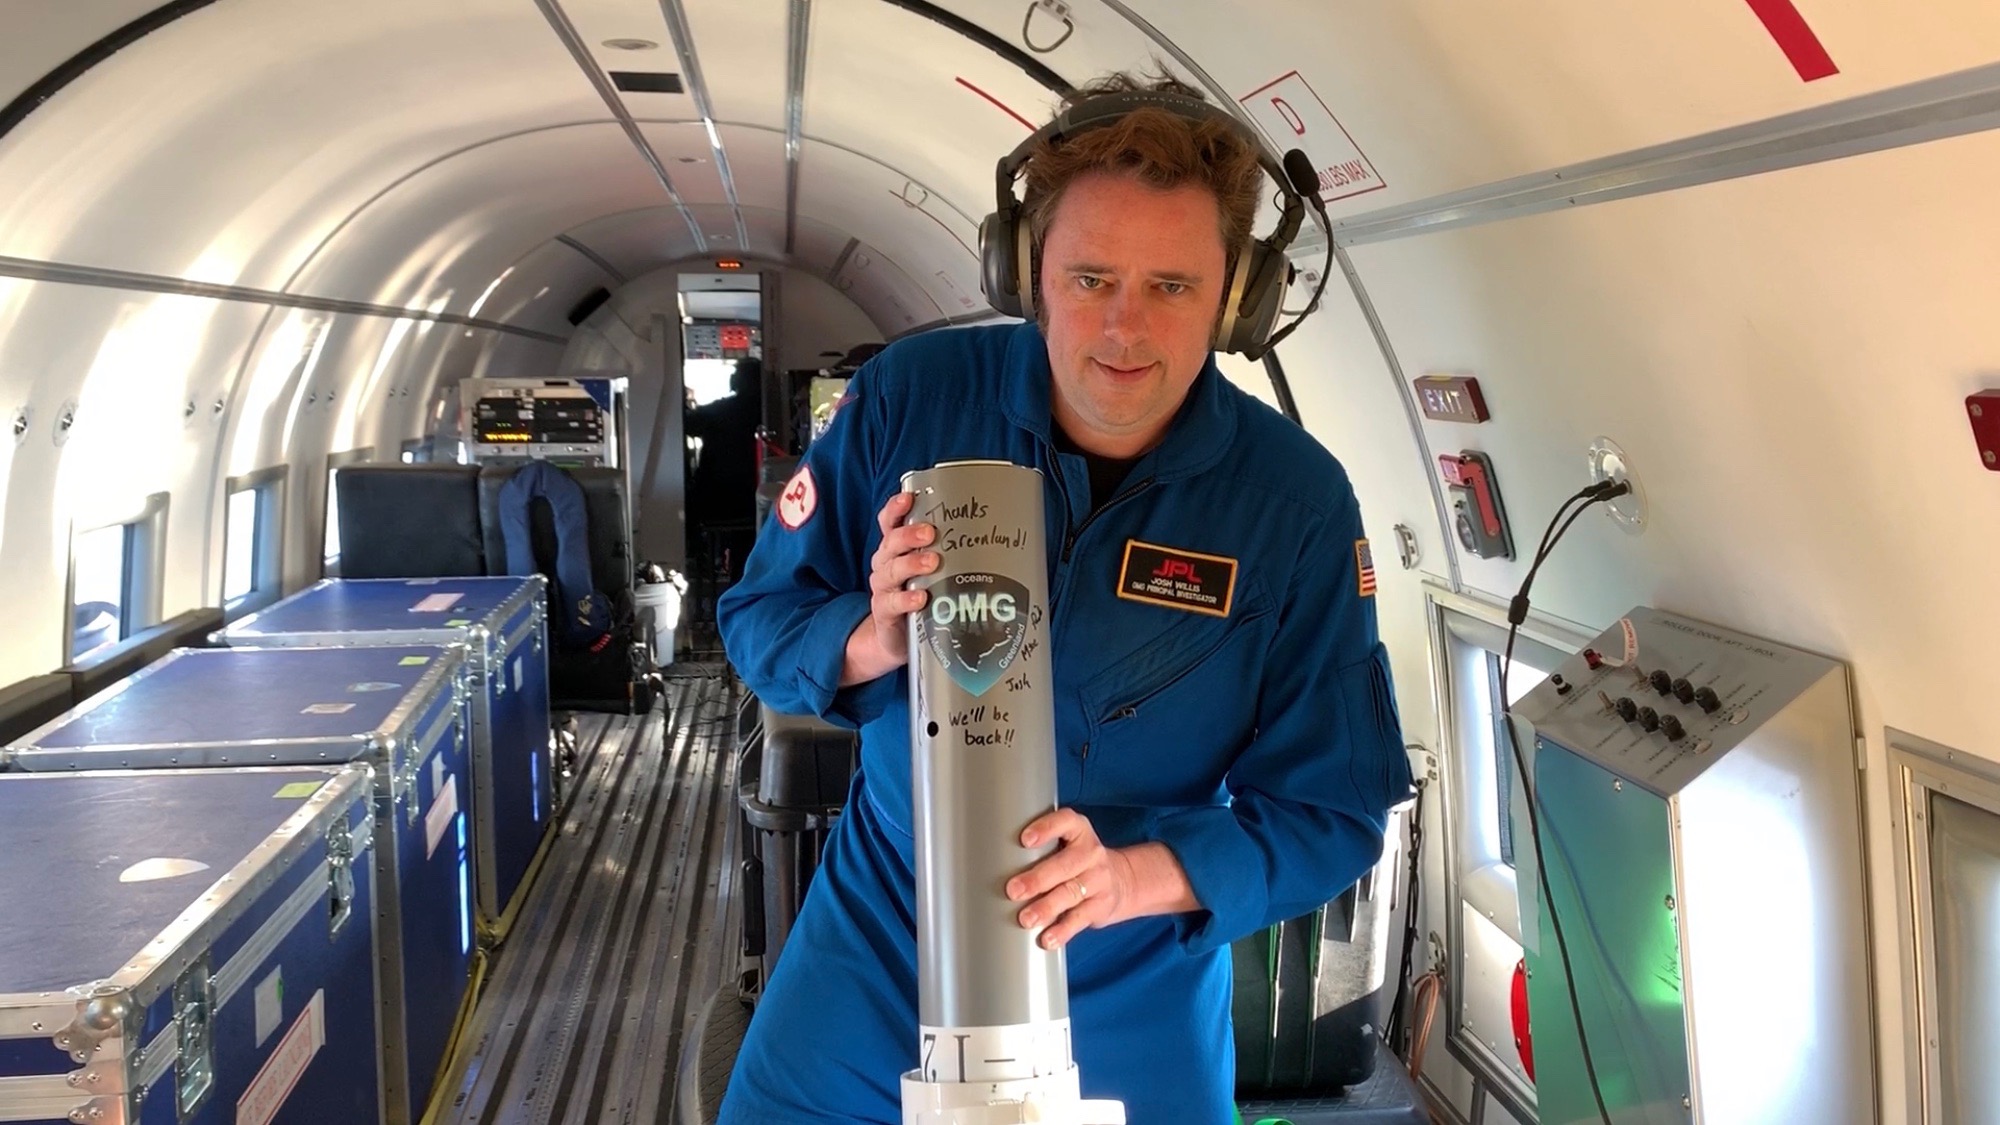 OMG Principal Investigator Josh Willis of NASA's Jet Propulsion Laboratory prepares to release the last ocean probe for OMG's 2019 ocean survey from the interior of an Airtec DC-3 Turbo aircraft.